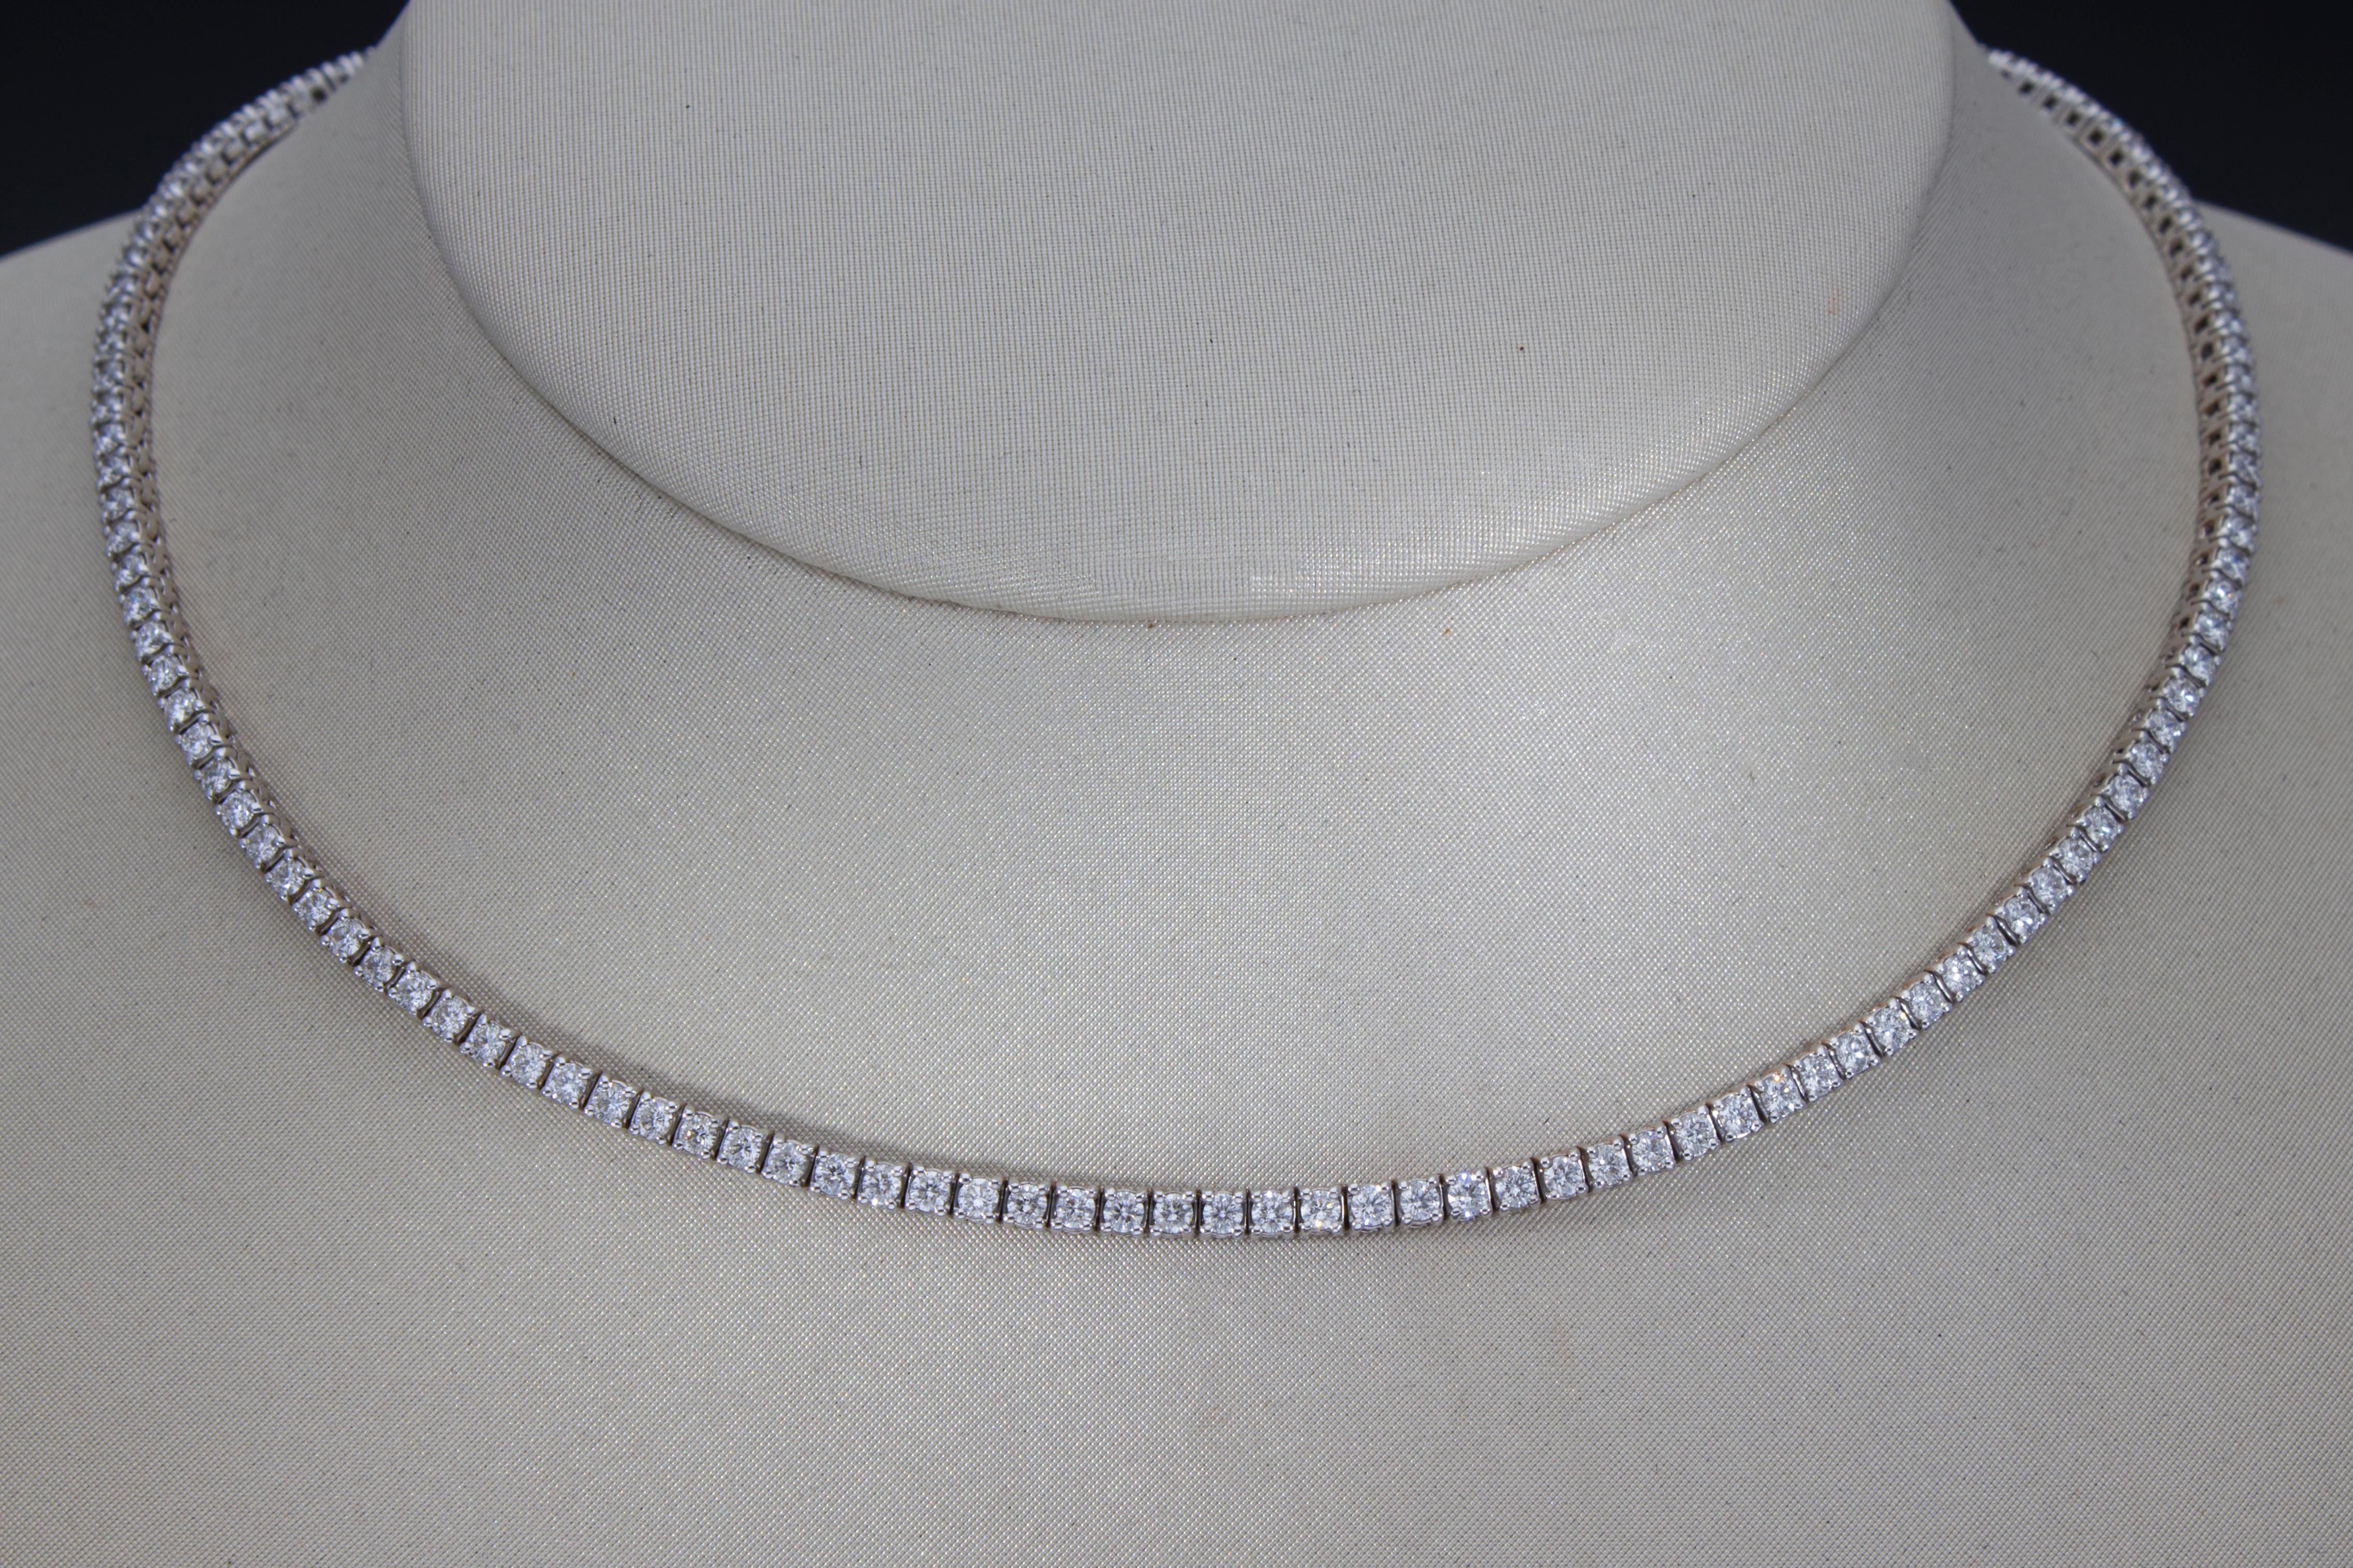 The necklace is made up of a row of 154 brilliant cut diamonds, their total carat weight is 4.41 ct. 
The back of the necklace ends with a chain with ten diamonds, which allows you to wear the necklace with different lengths.
Total length of the